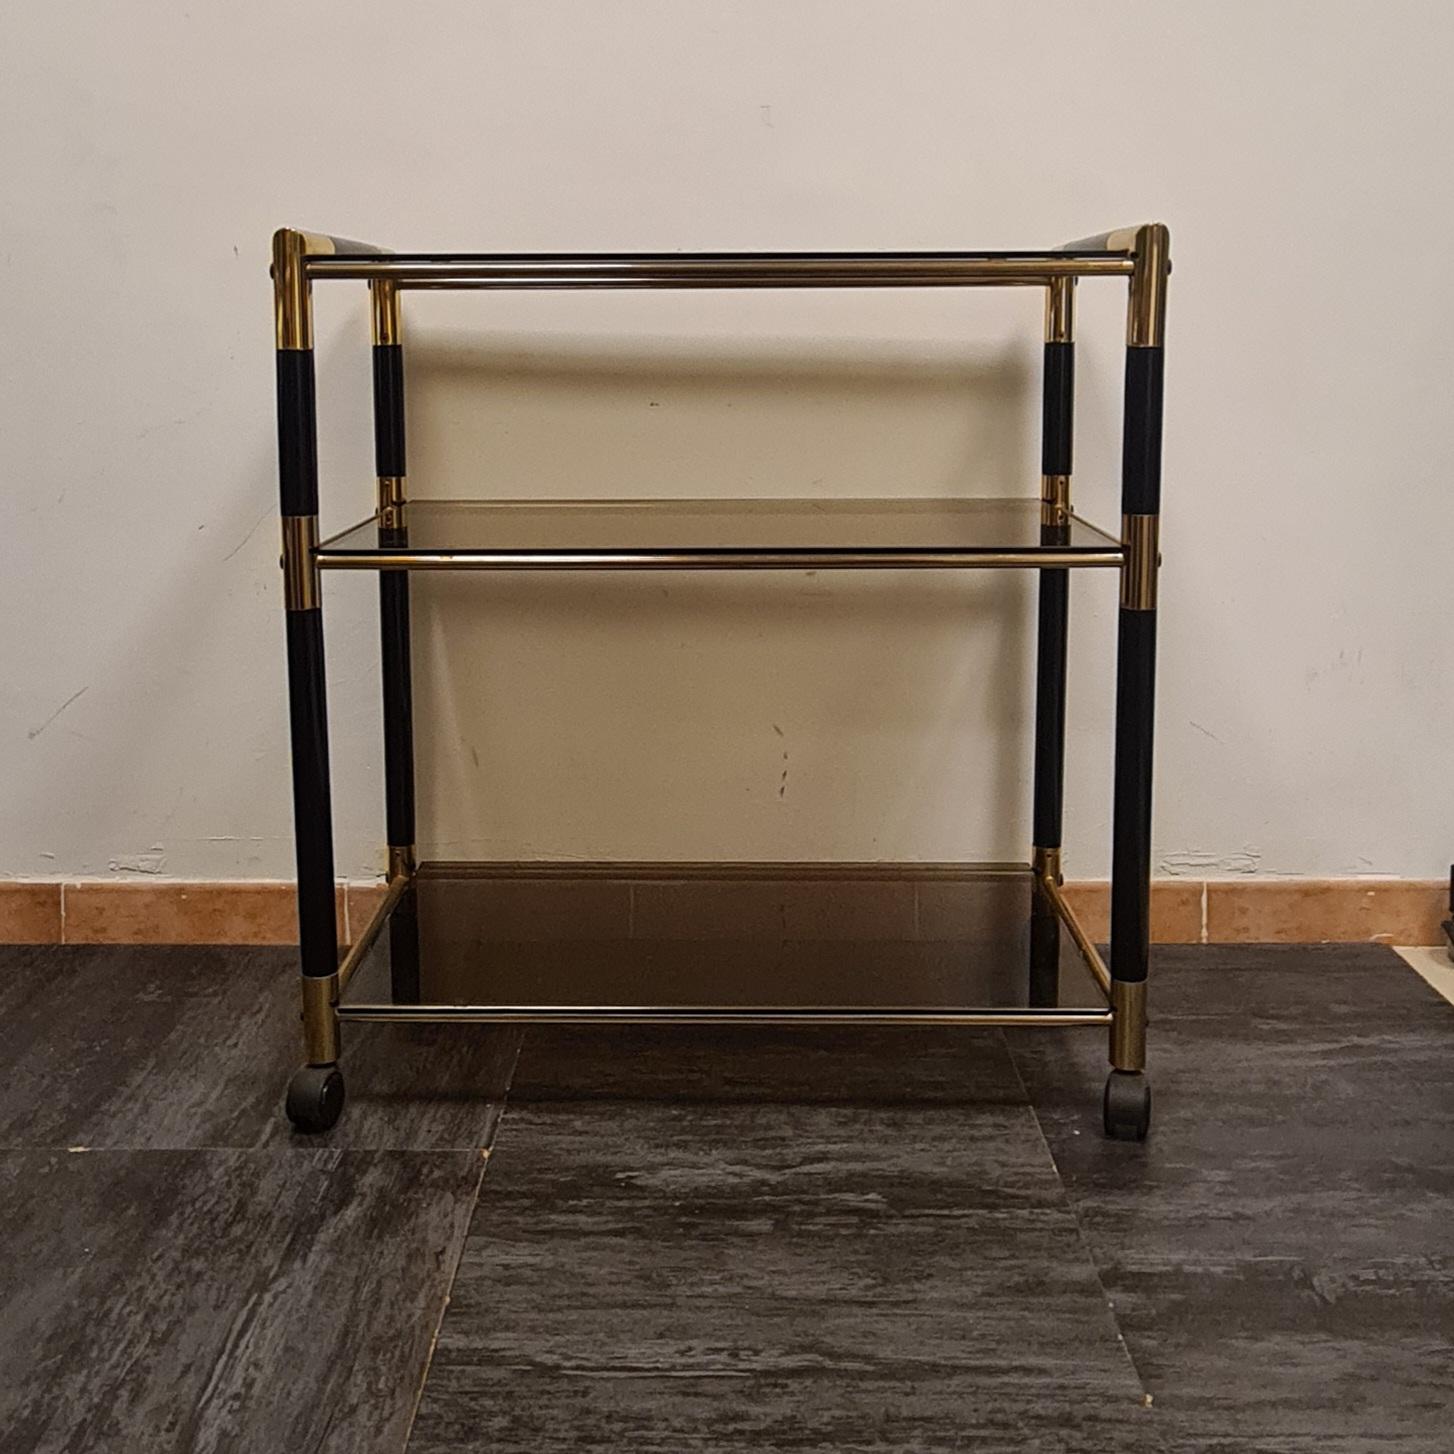 Elegant food cart by designer Tommaso Barbi.

The three-tiered trolley is made of a cylindrical lacquered wood frame with brass details and trim.

The three shelves are made of smoked glass.

Tommaso Barbi is a highly regarded Italian designer, his